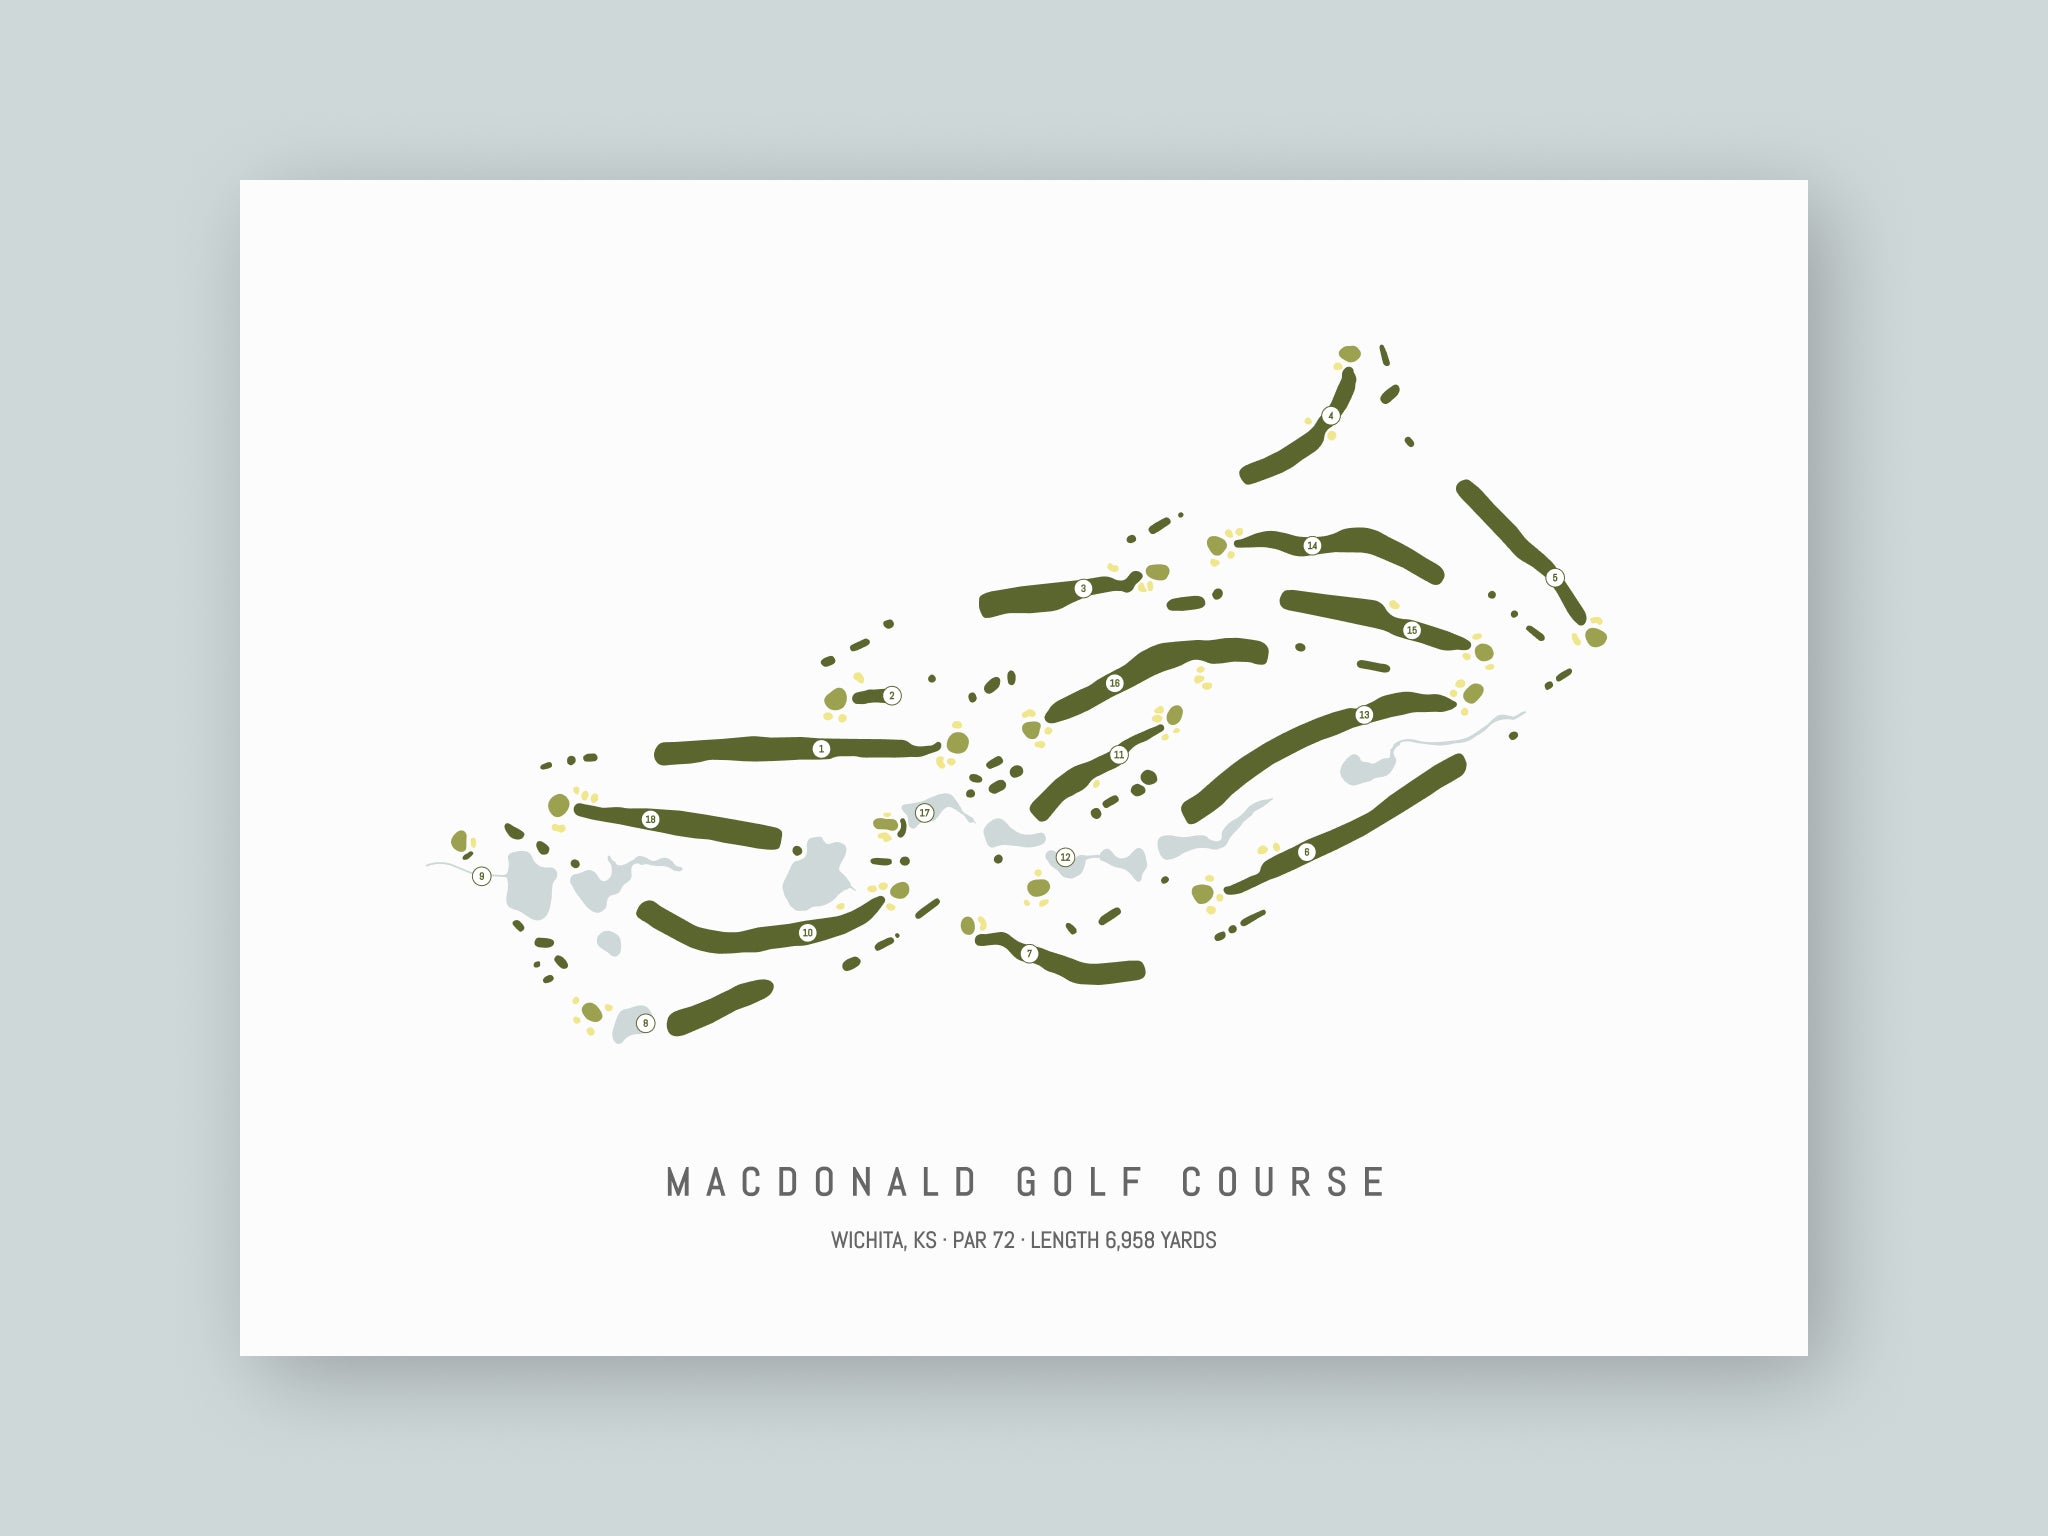 MacDonald-Golf-Course-KS--Unframed-24x18-With-Hole-Numbers